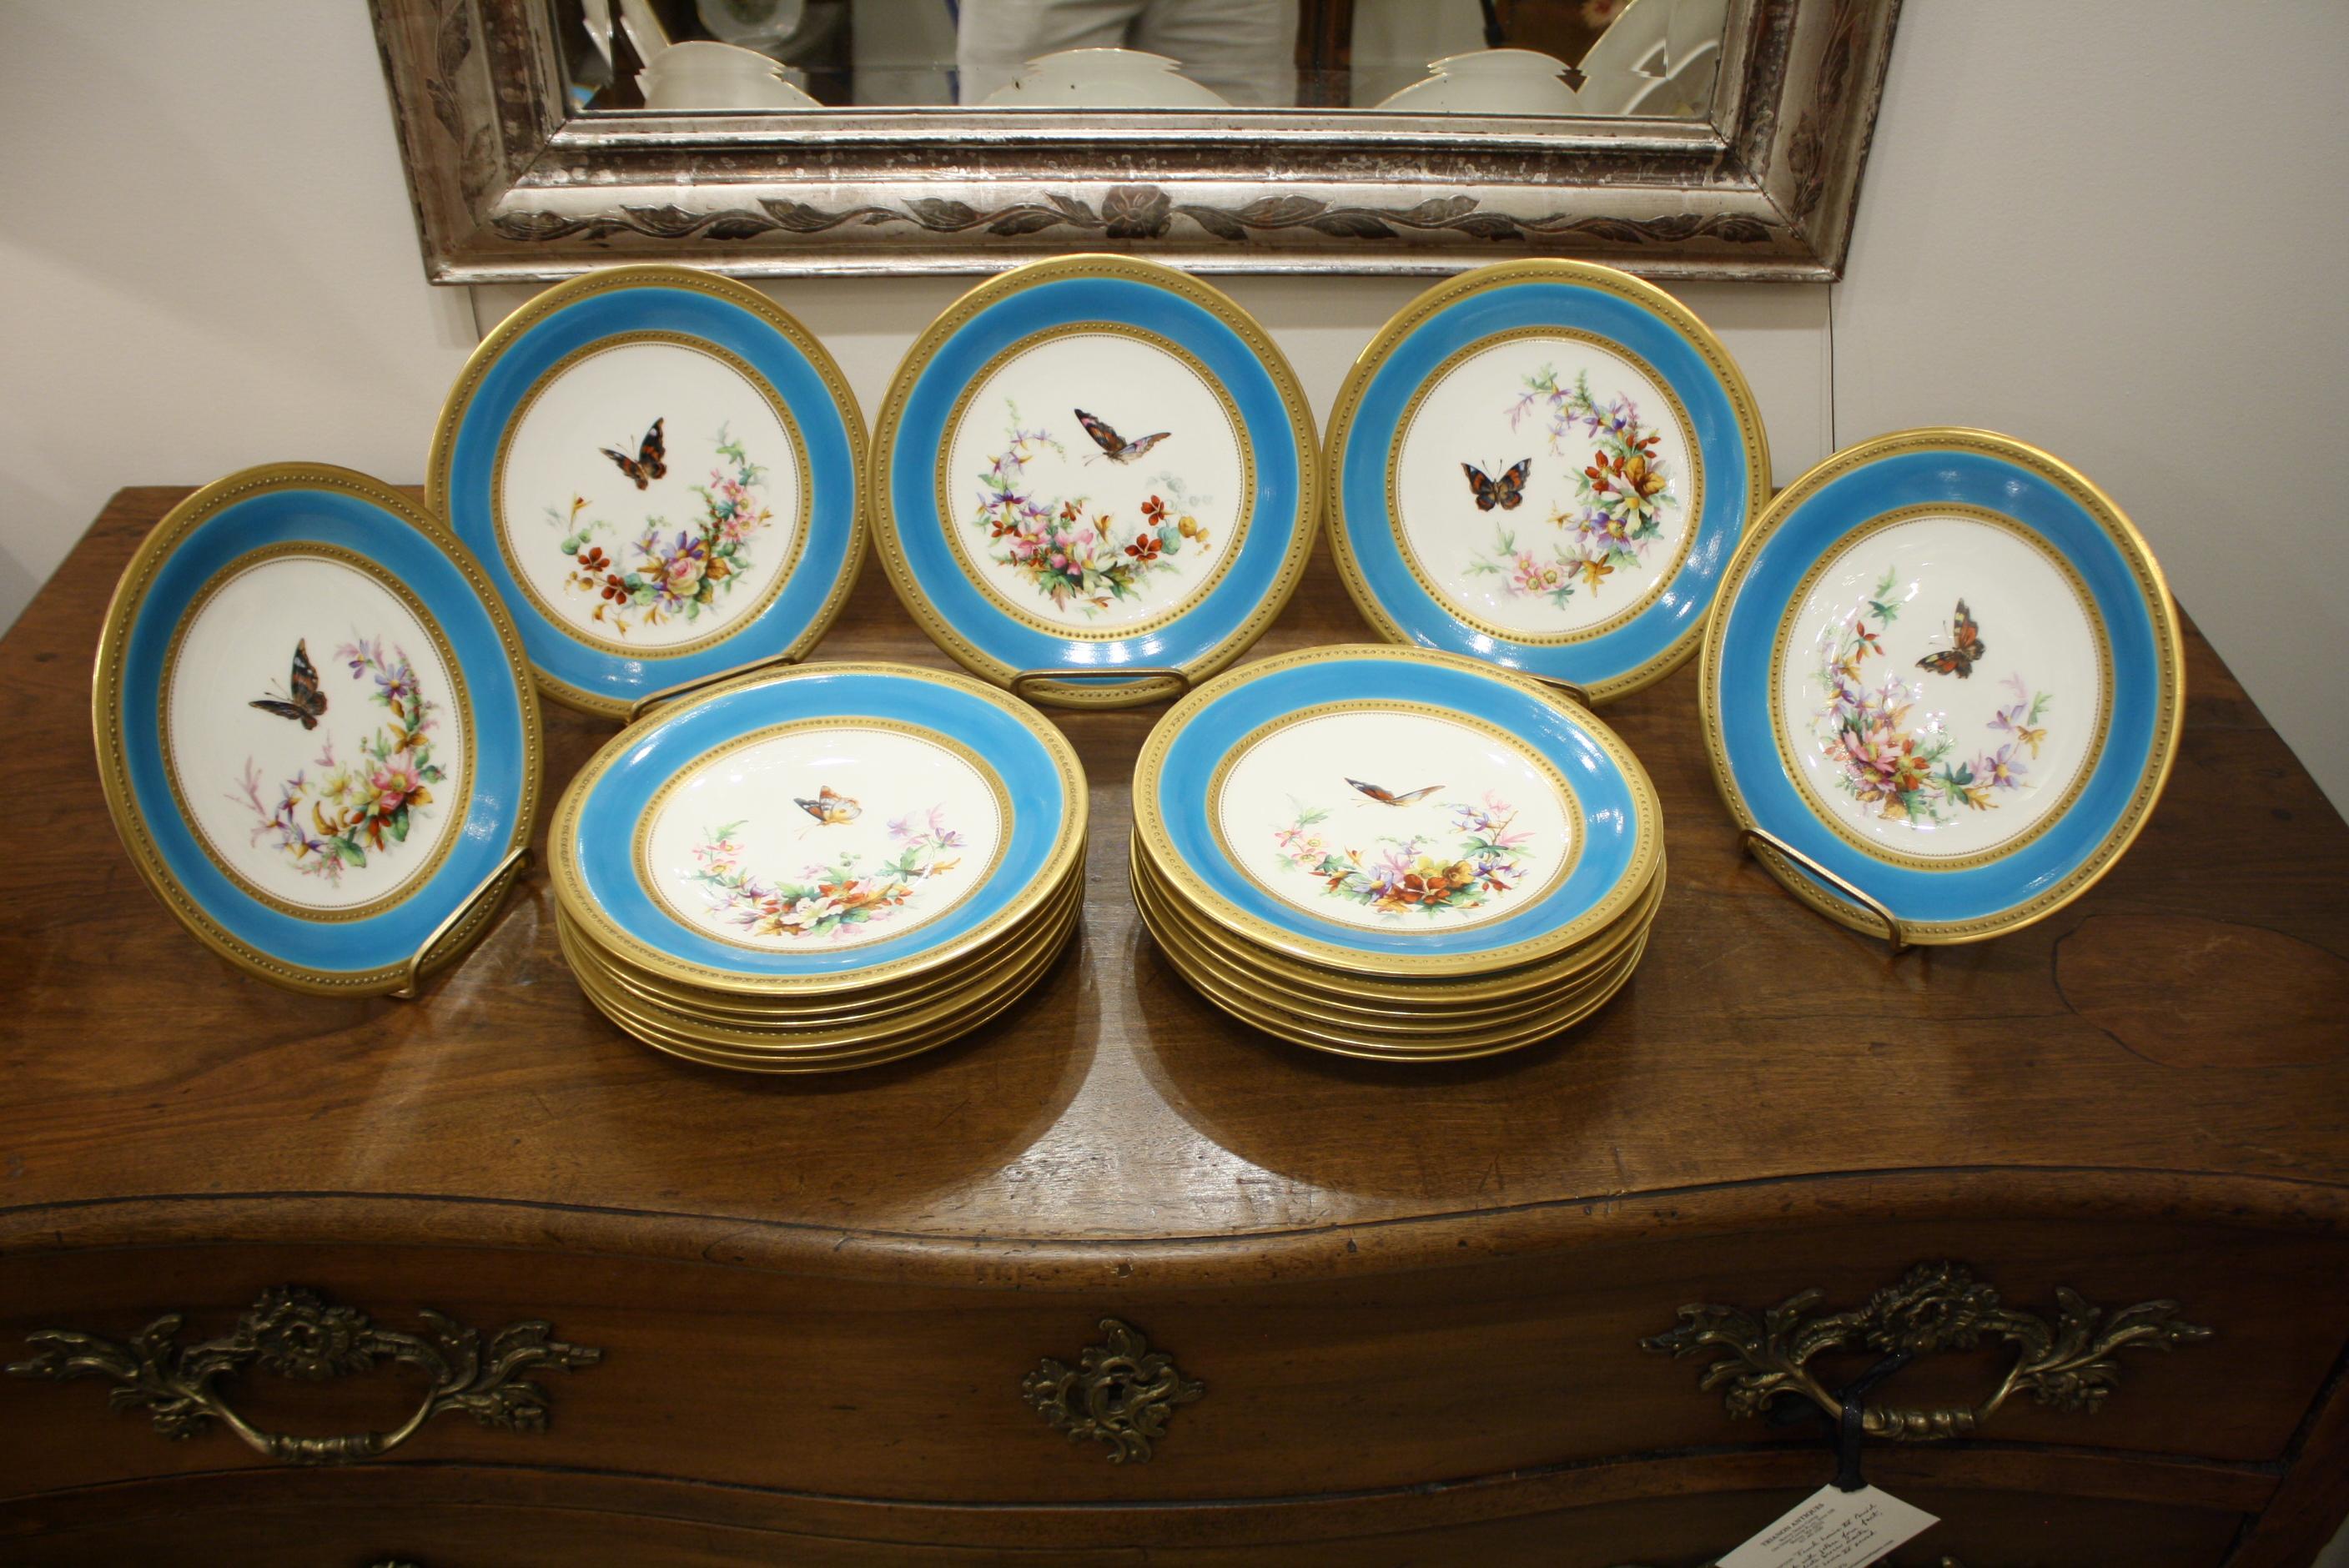 19th Century Minton Dessert Service with Butterflies and Flowers and Gold Rims For Sale